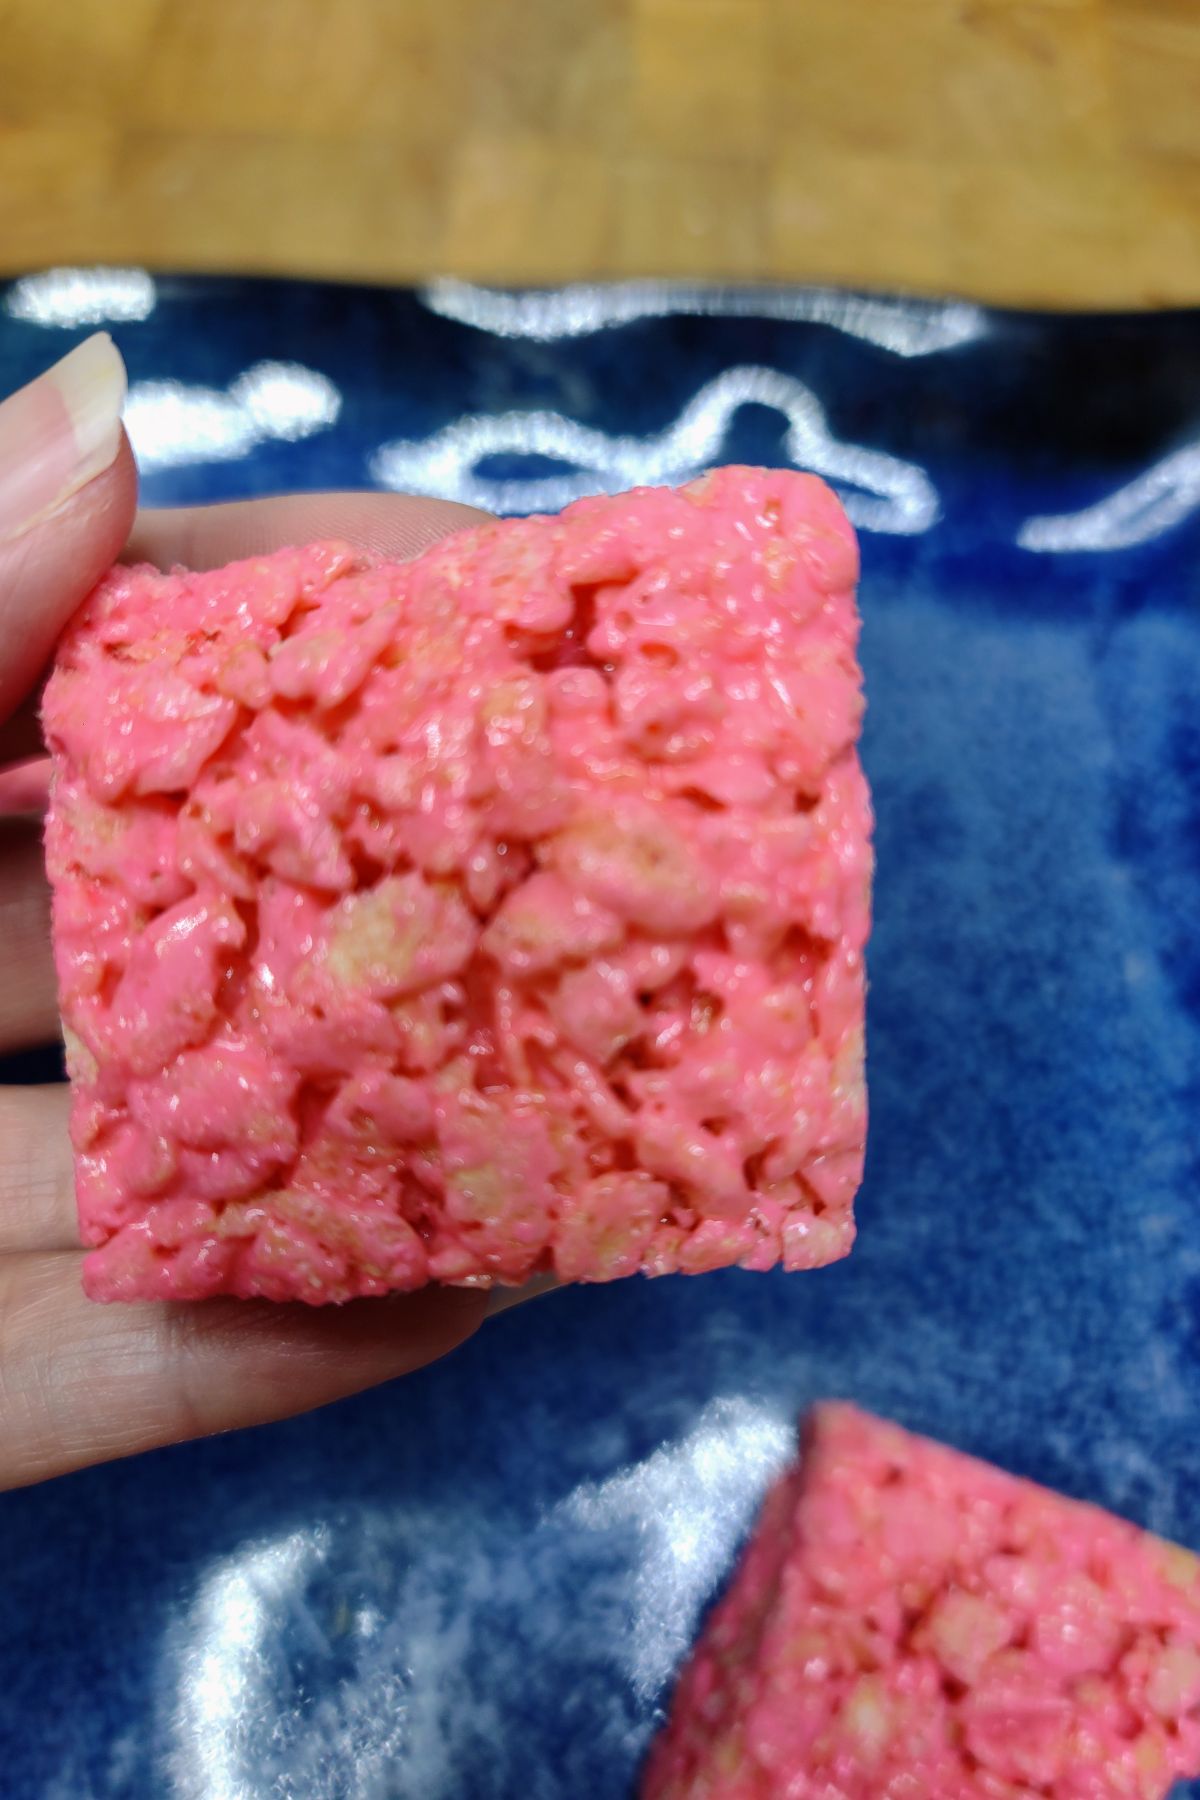 Hand holding a pink rice krispie treat over a blue plate.